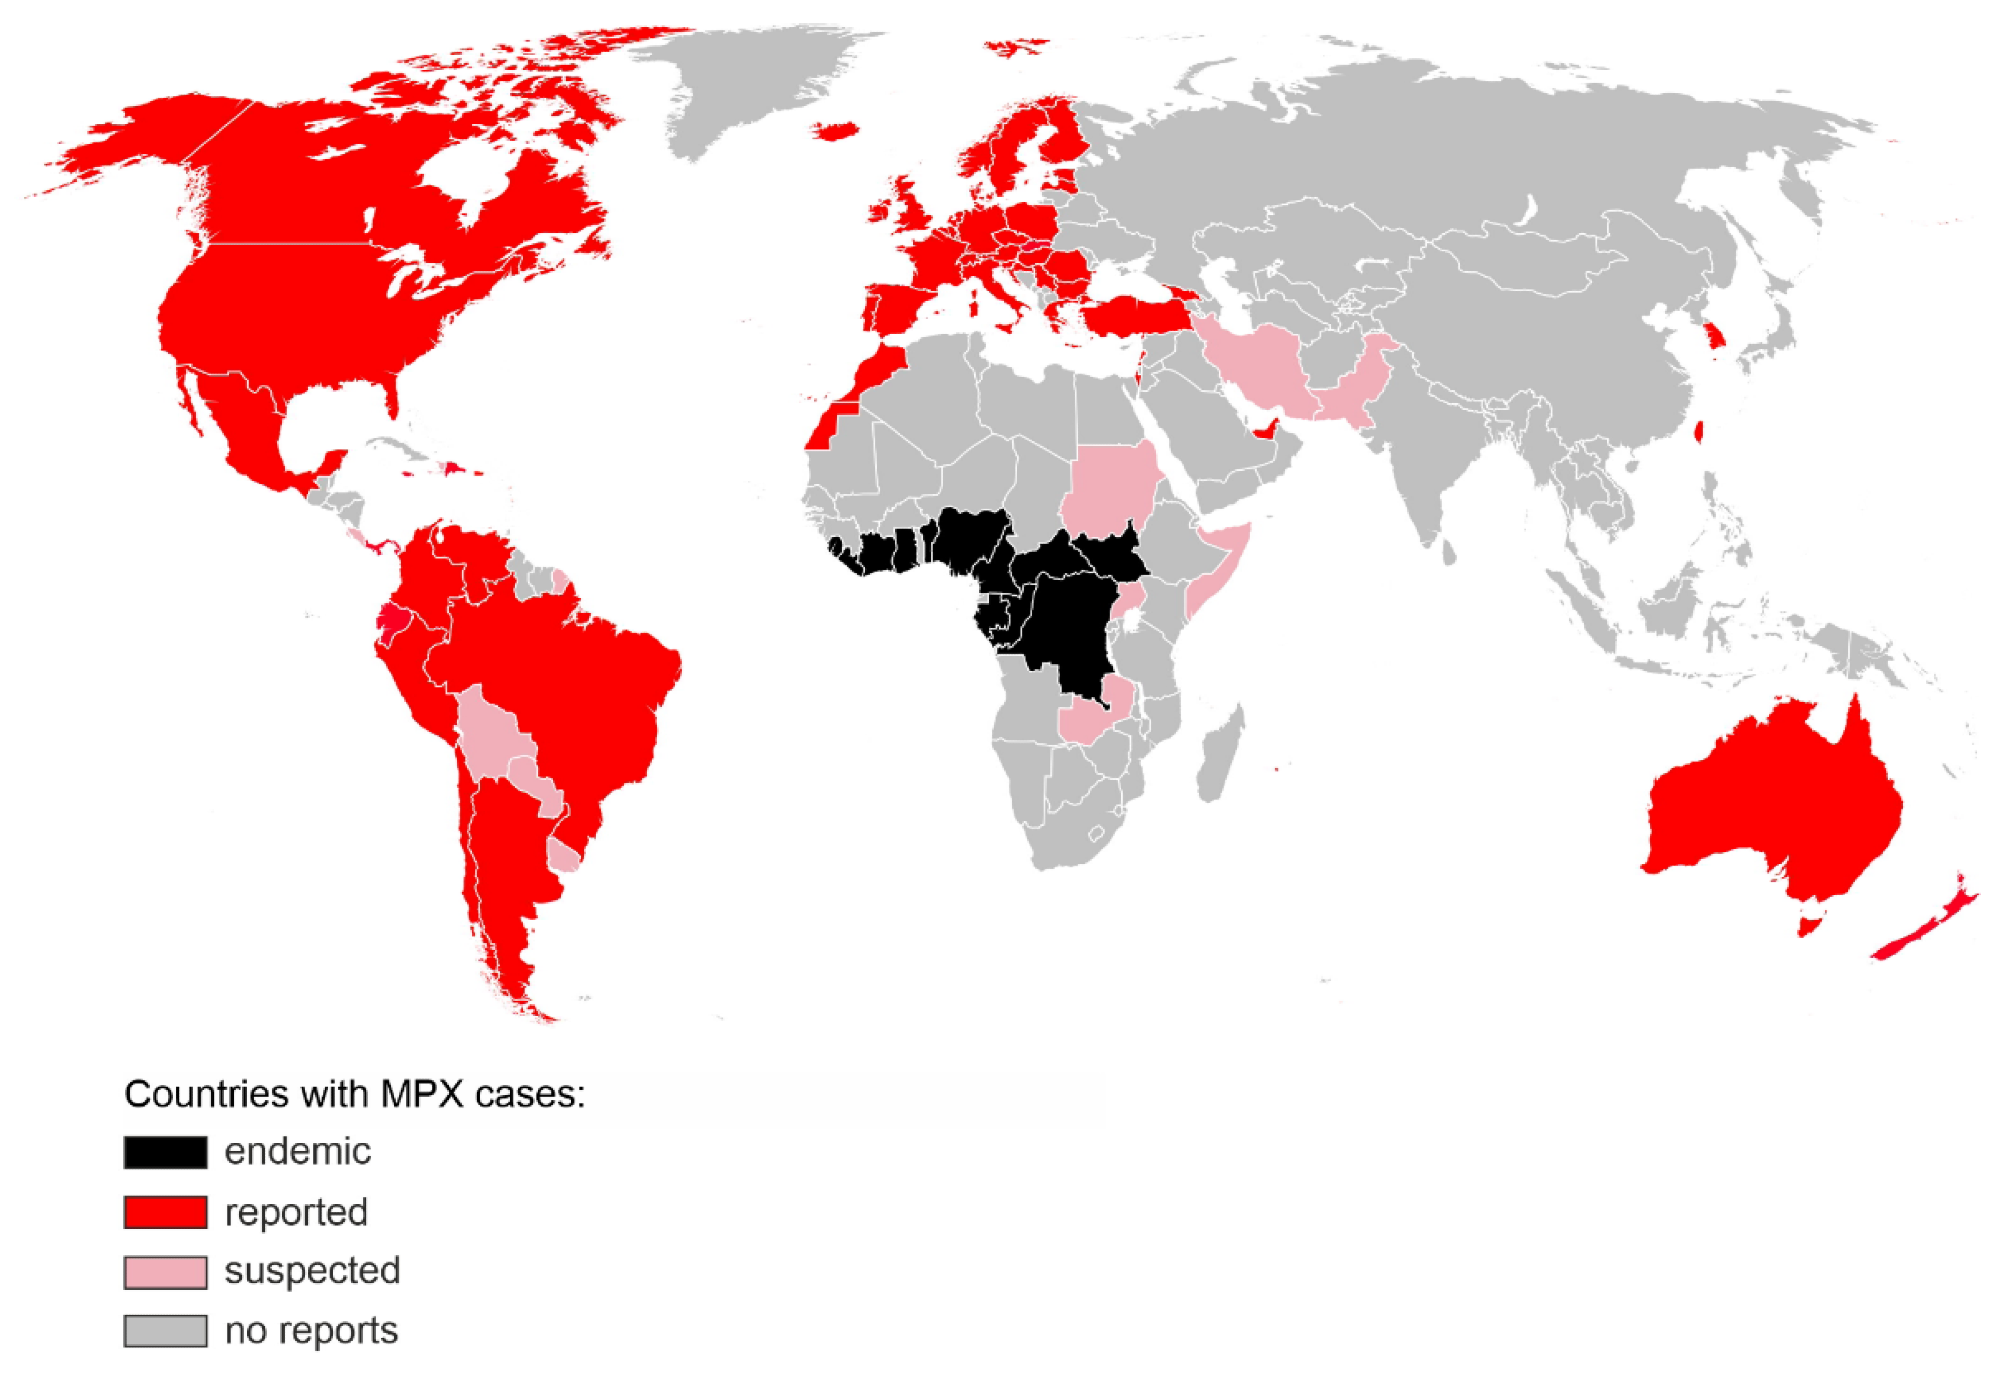 Countries with confirmed (red) or suspected (pink) MPX cases during the 2022 non-endemic outbreak. Regions, where MPX was endemic prior to 2022, are shown in black. The map includes cases reported until 12 July 2022 [8]. The base layer map was obtained from https://commons.wikimedia.org/wiki/File:BlankMap-World.svg (accessed on 1 July 2022).